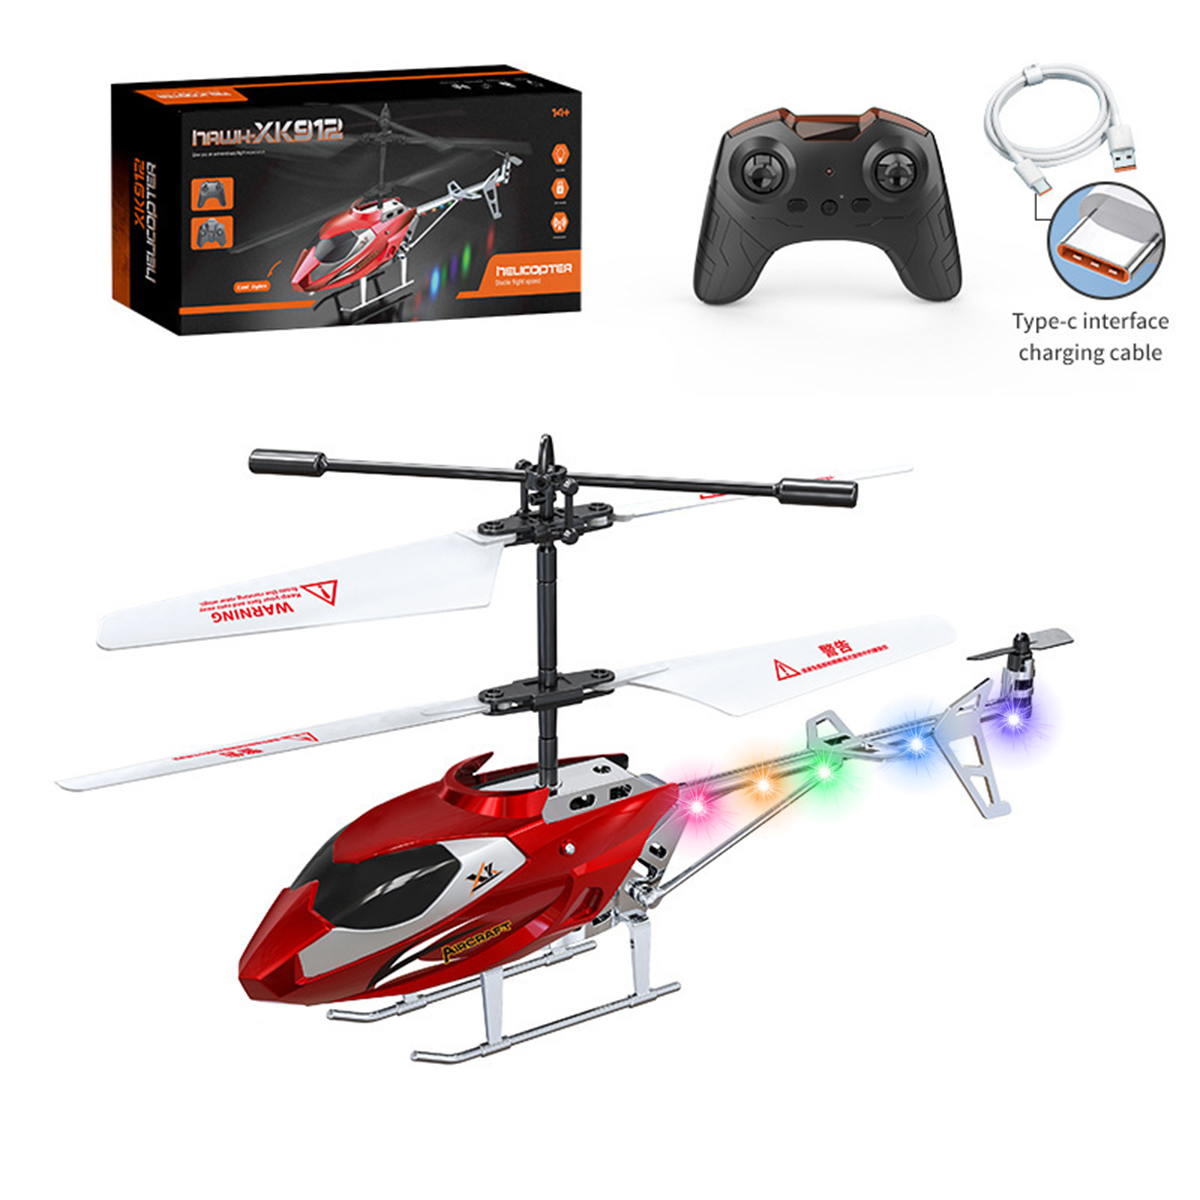 PayUSD Remote Control Helicopter Mini Gyroscope RC Helicopters LED Light for Indoor to Fly for Kids and Beginners, Red - image 1 of 8